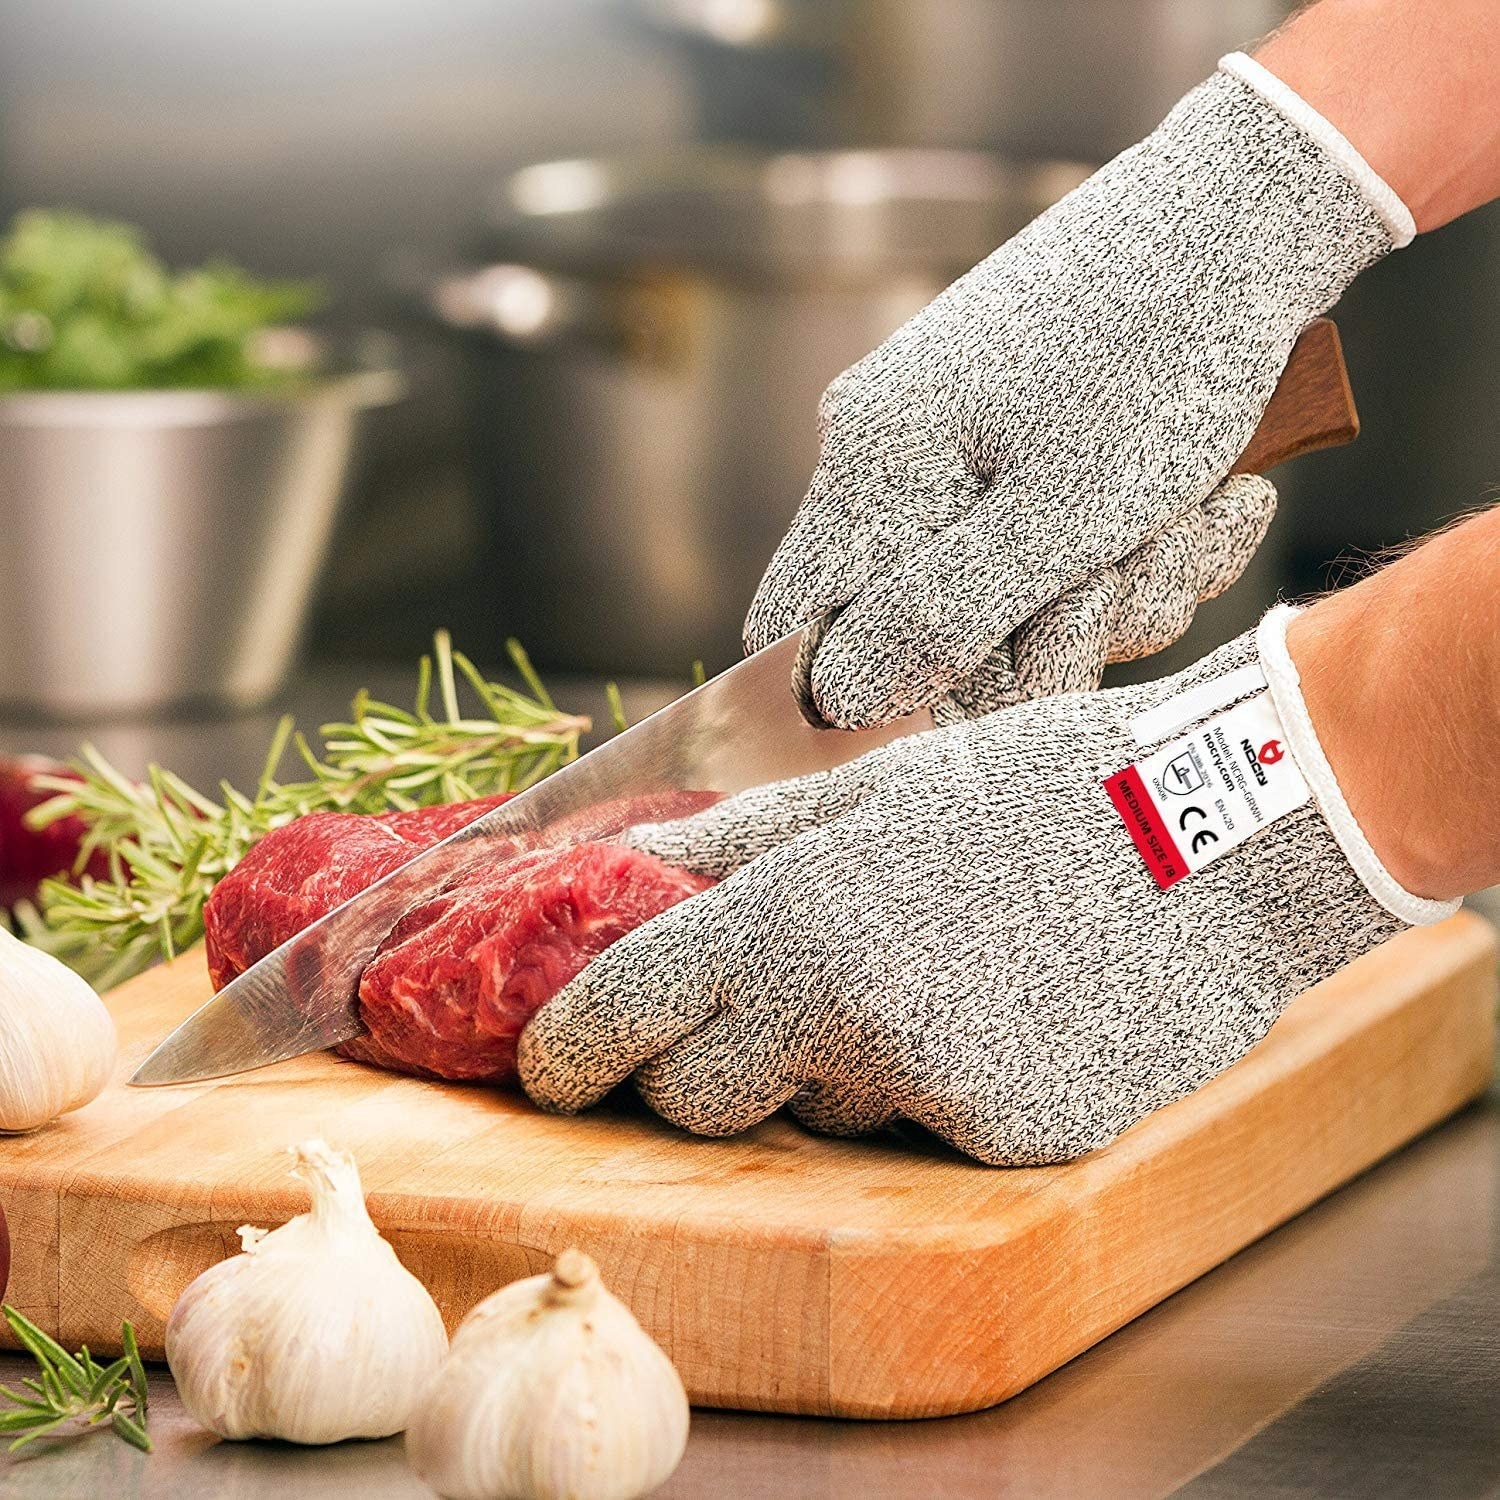 A person wearing the gloves while cutting a piece of meat